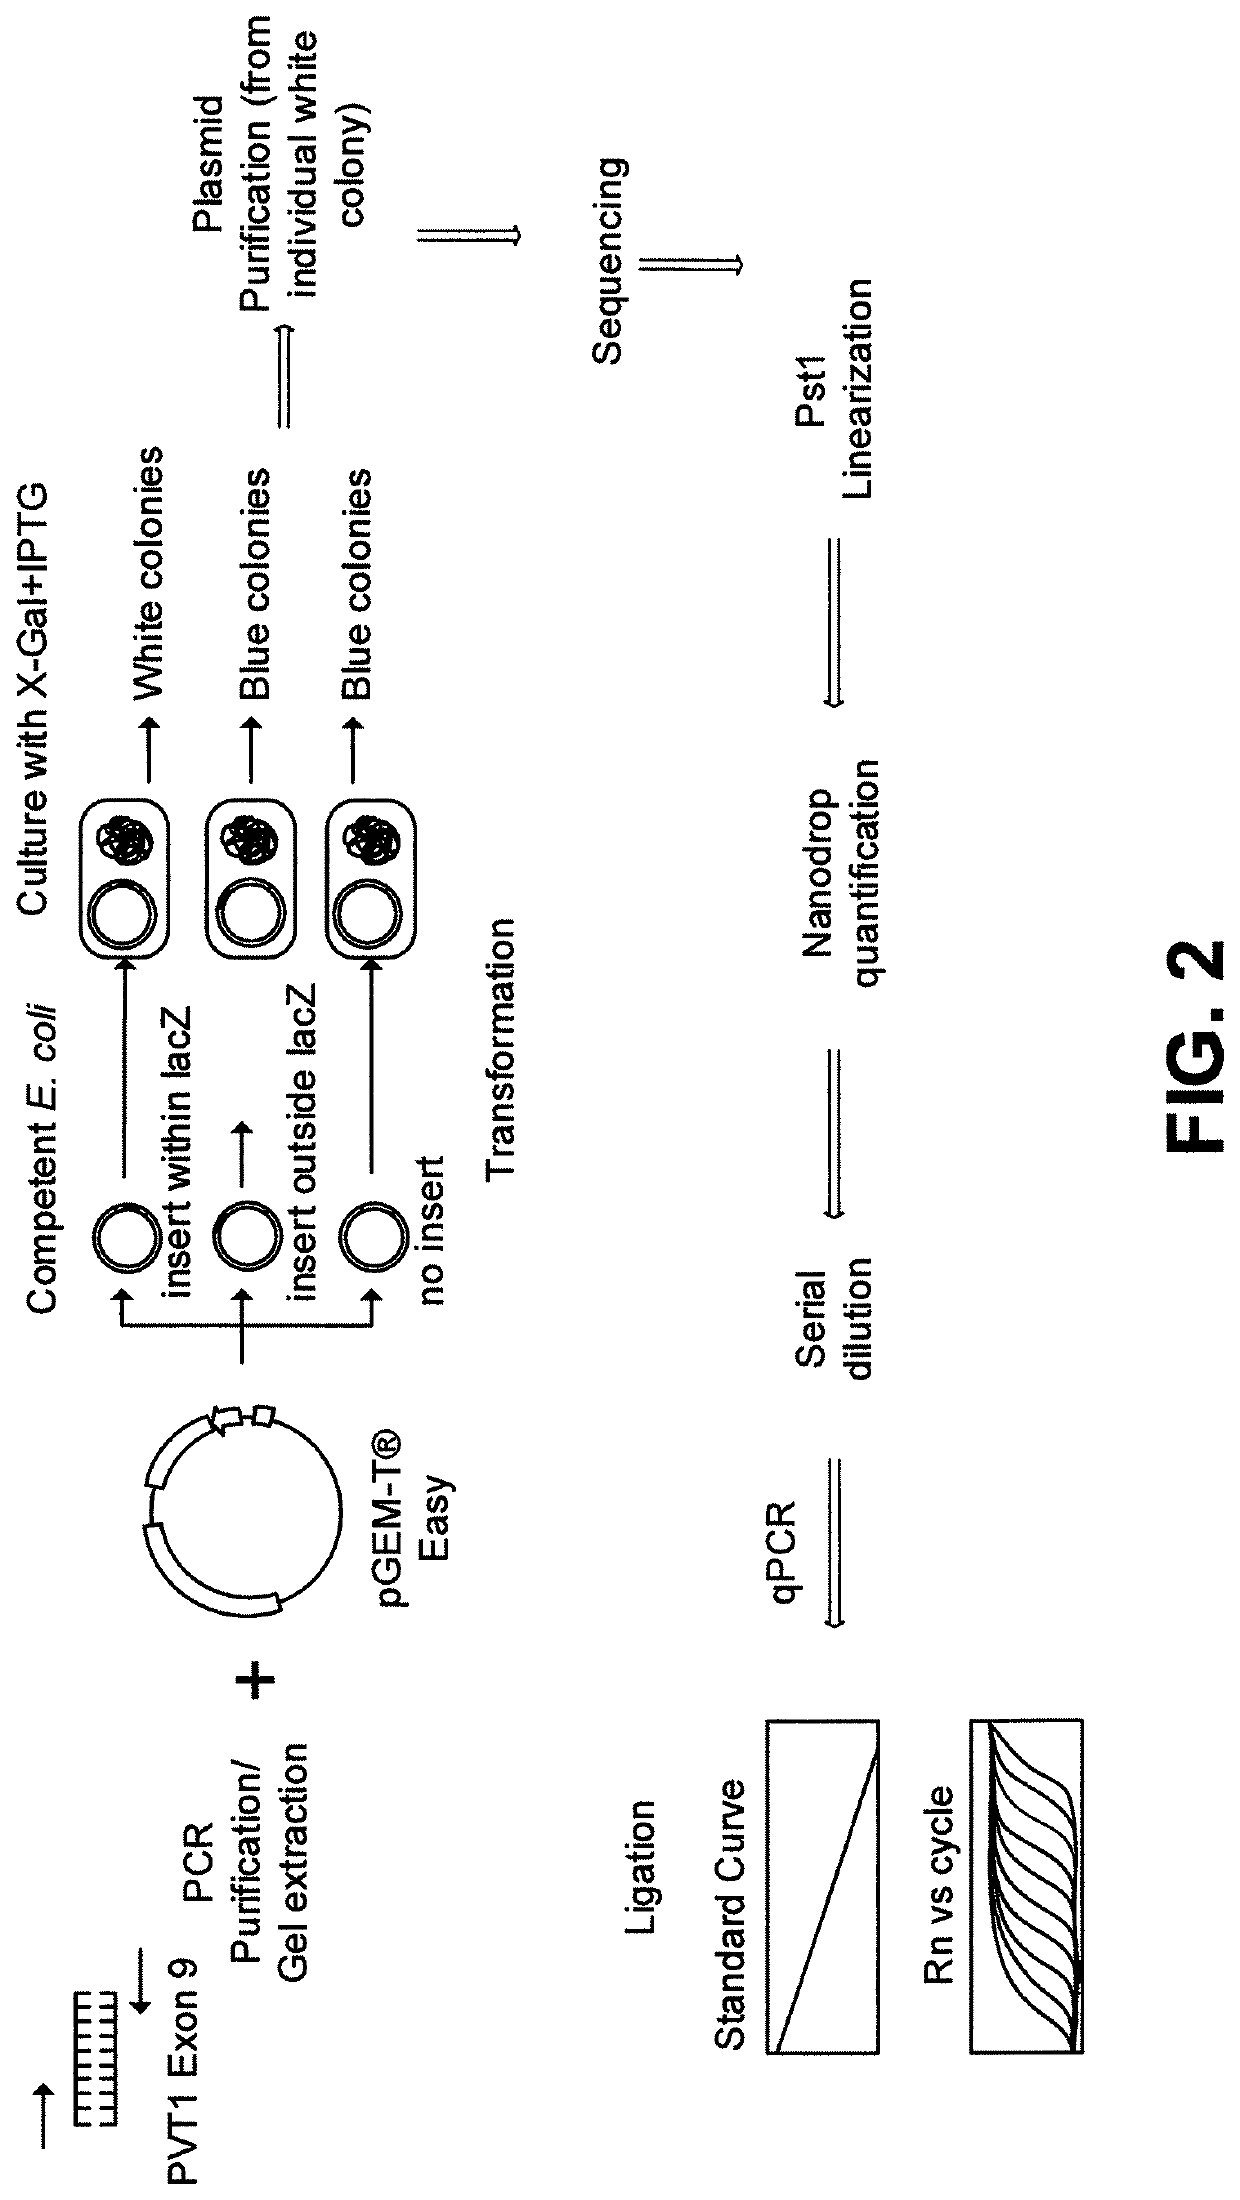 Plasmid vector for expressing a PVT1 exon and method for constructing standard curve therefor